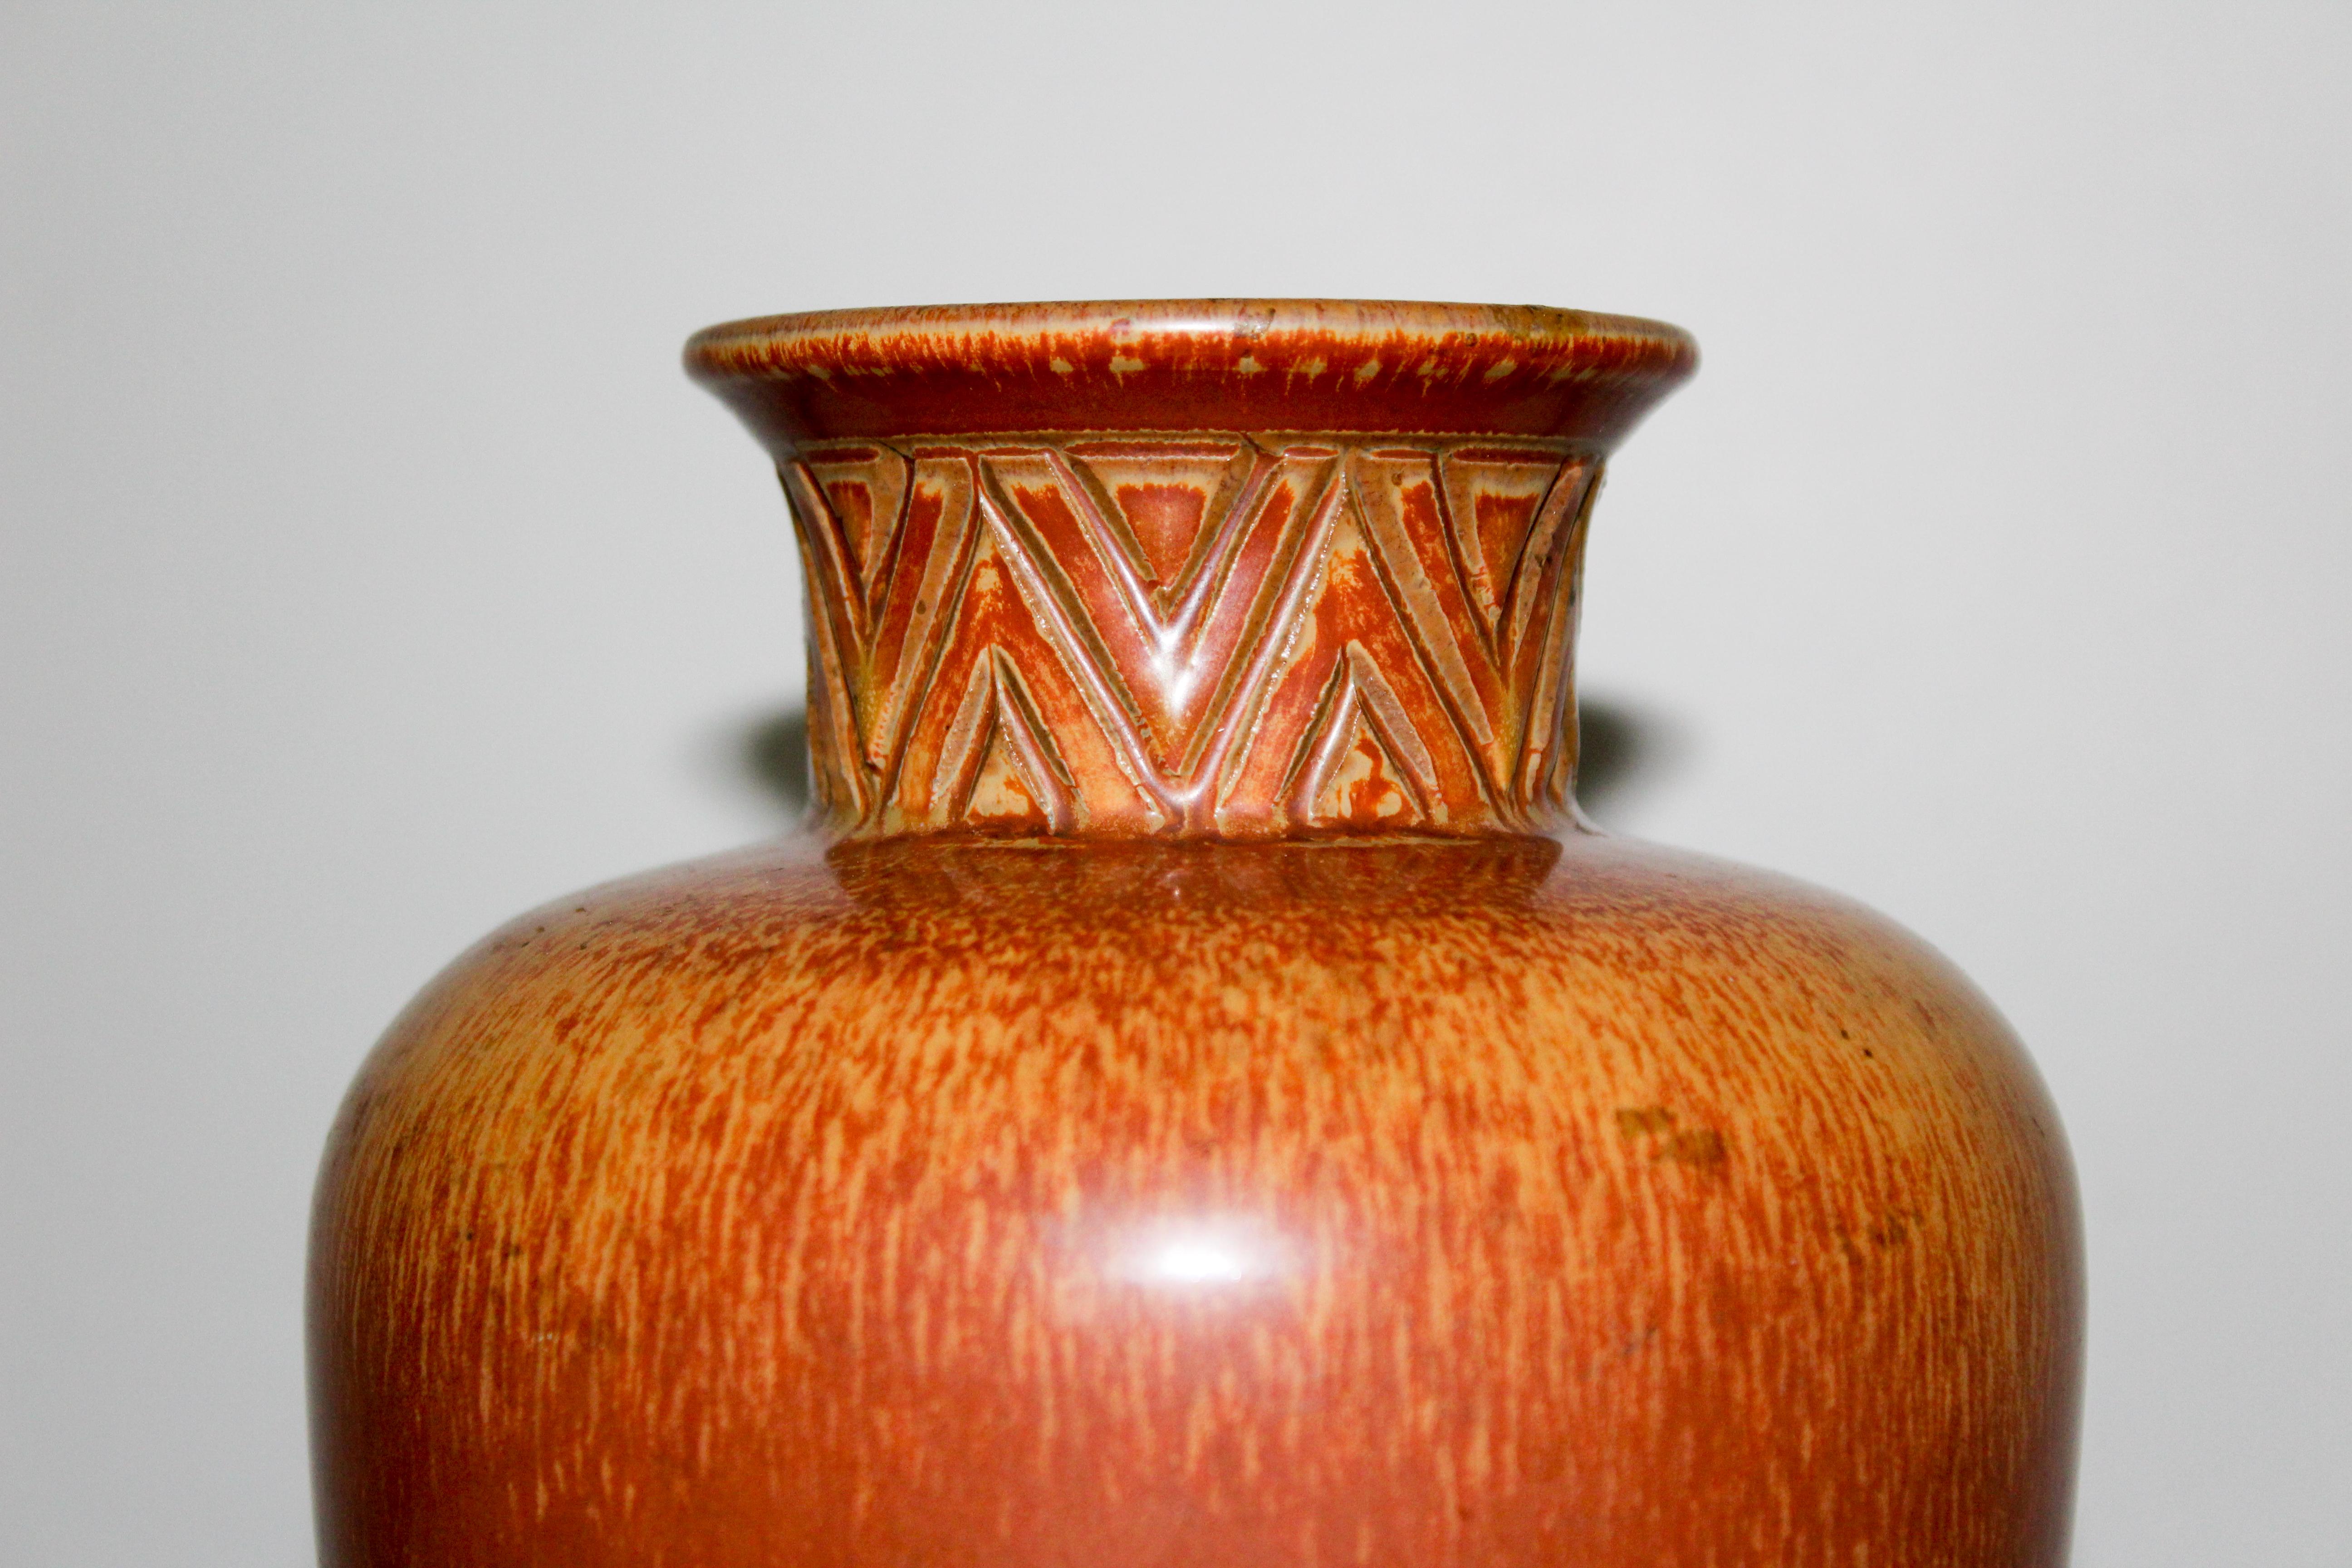 Midcentury ceramic vase by Swedish designer and potter Gunnar Nylund for Rörstrand. The vase is in good vintage condition with signs of usage consistent with age.